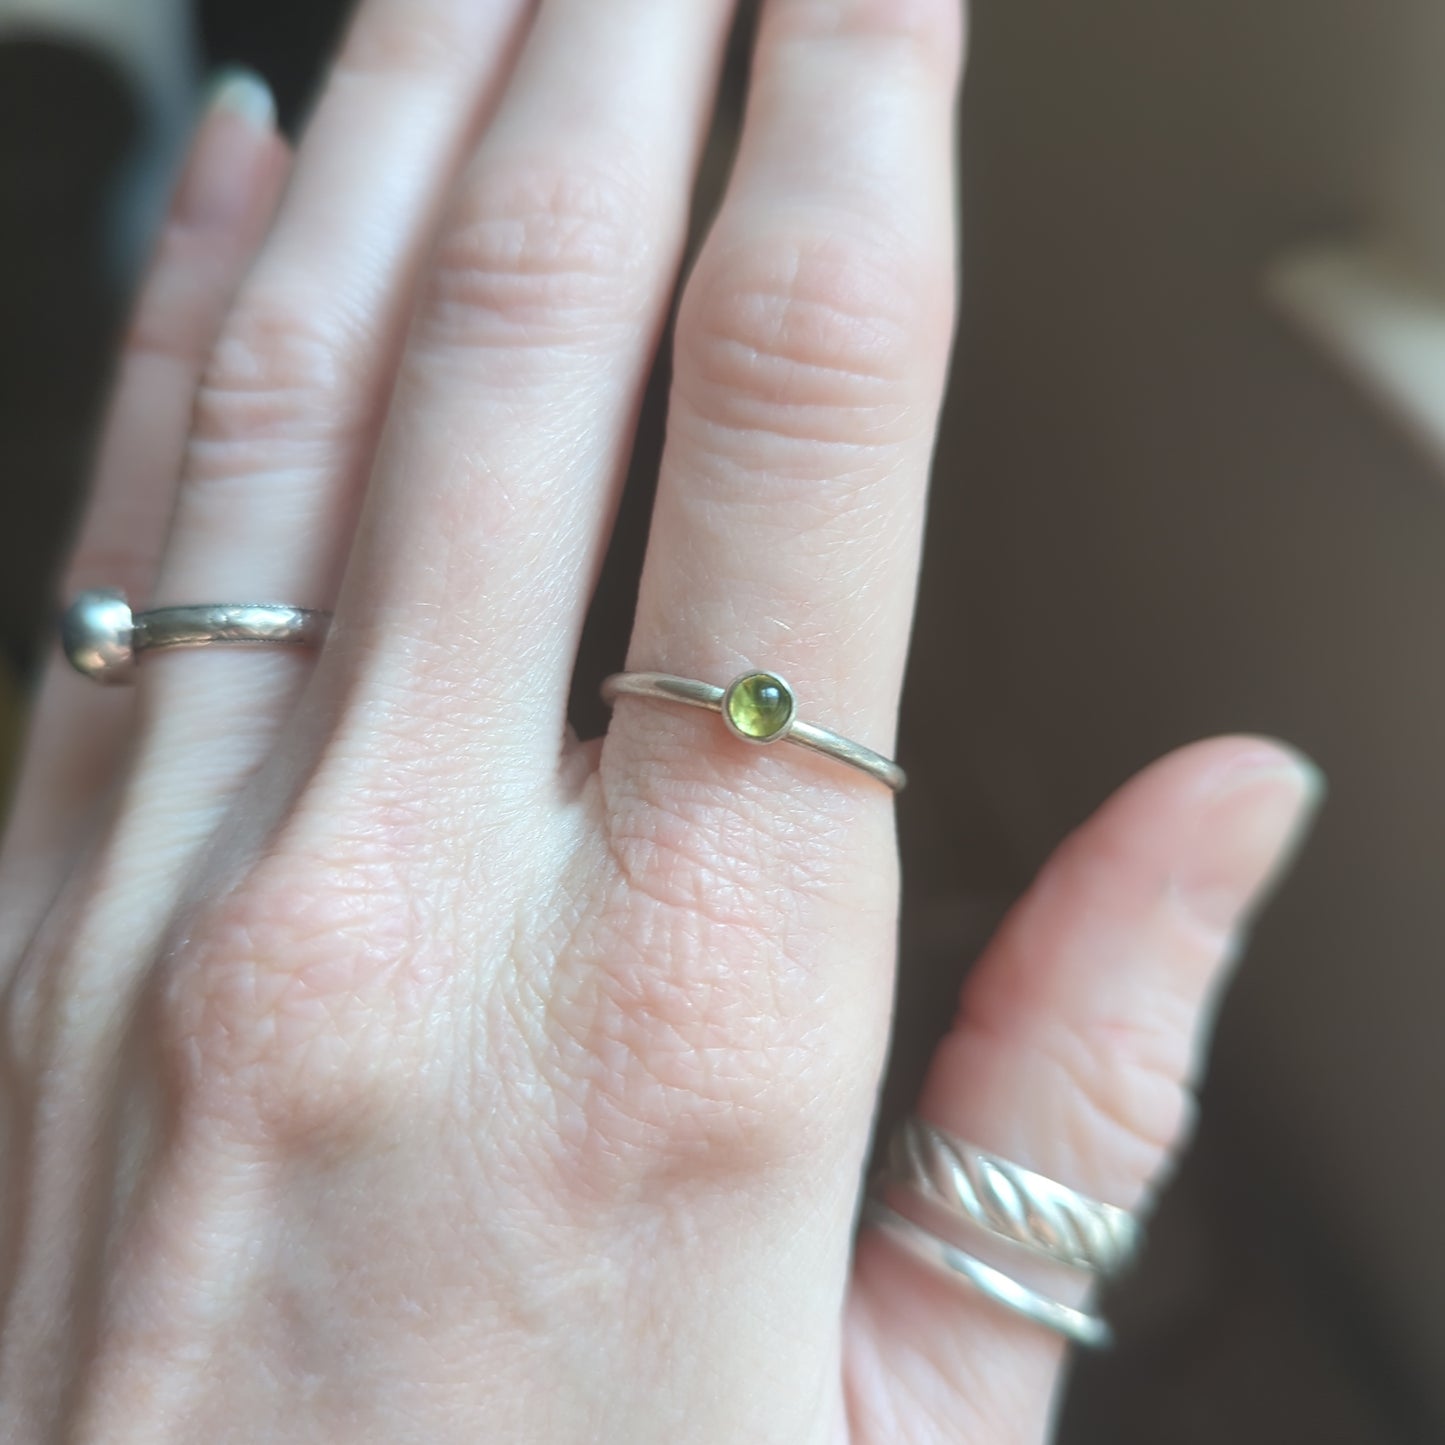 4mm Peridot Sterling Silver Stacker Ring - Size 8 + 9.5